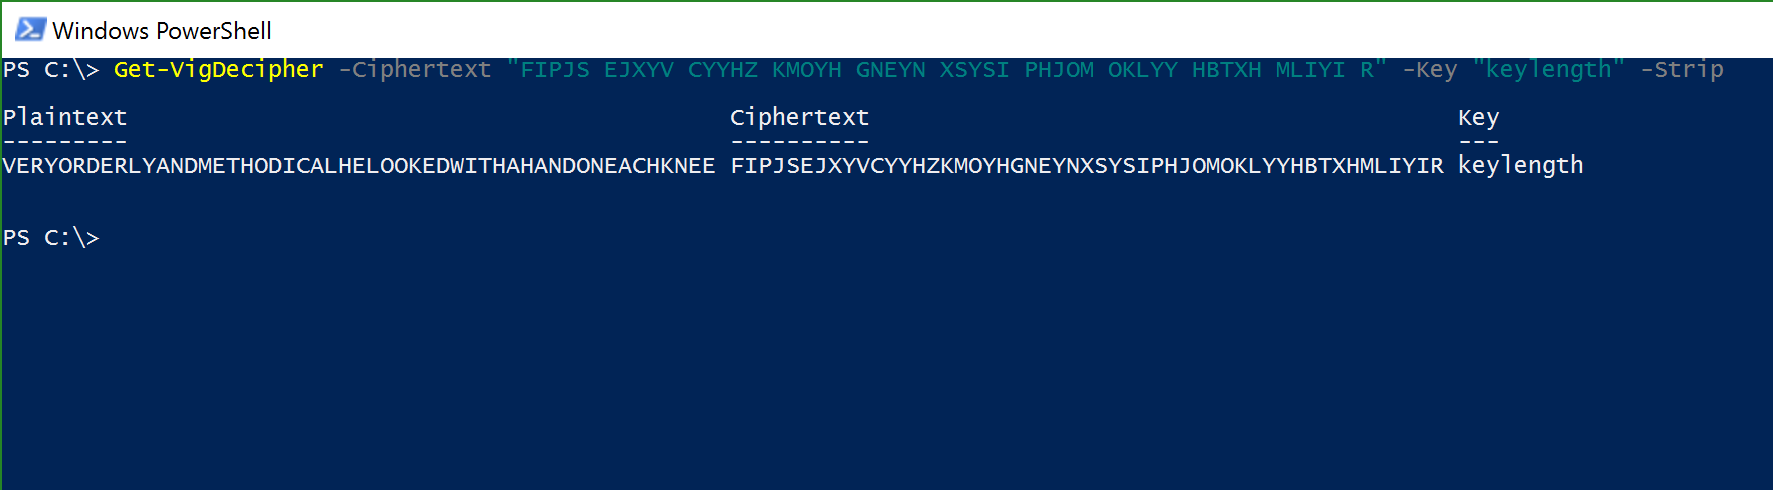 Reinventing the Wheel in PowerShell: PoshCiphers - Part 1